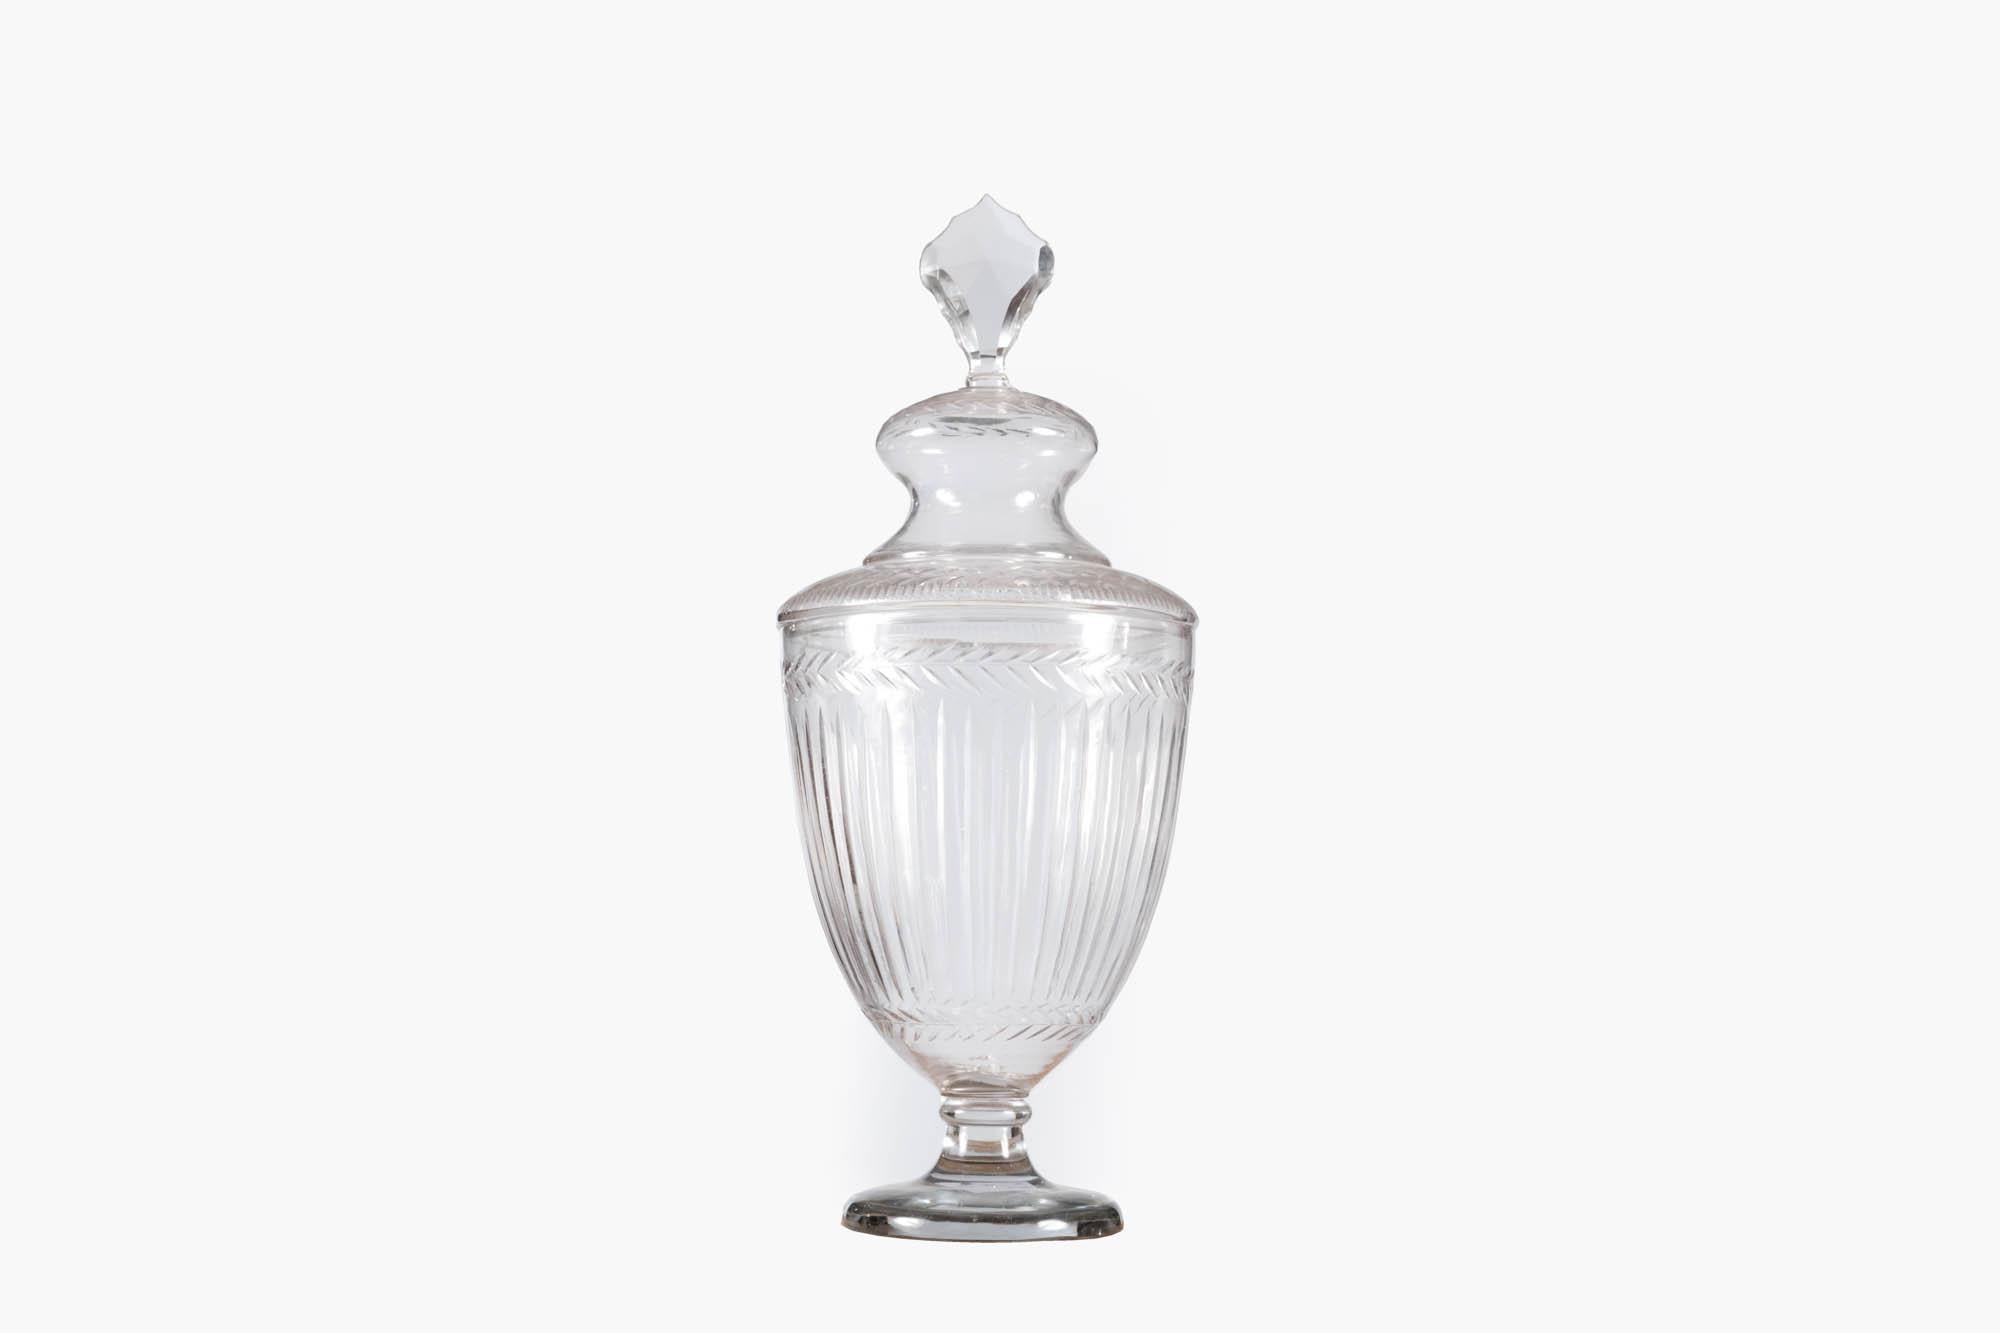 19th Century Irish etched glass bonboniere or fruit-cooler jar. Raised on a rounded stemmed base with a goblet-style body featuring vertical cutting and a horizontal band of cut ‘laurel-leaf’ decoration. The removable dome-top is complete with